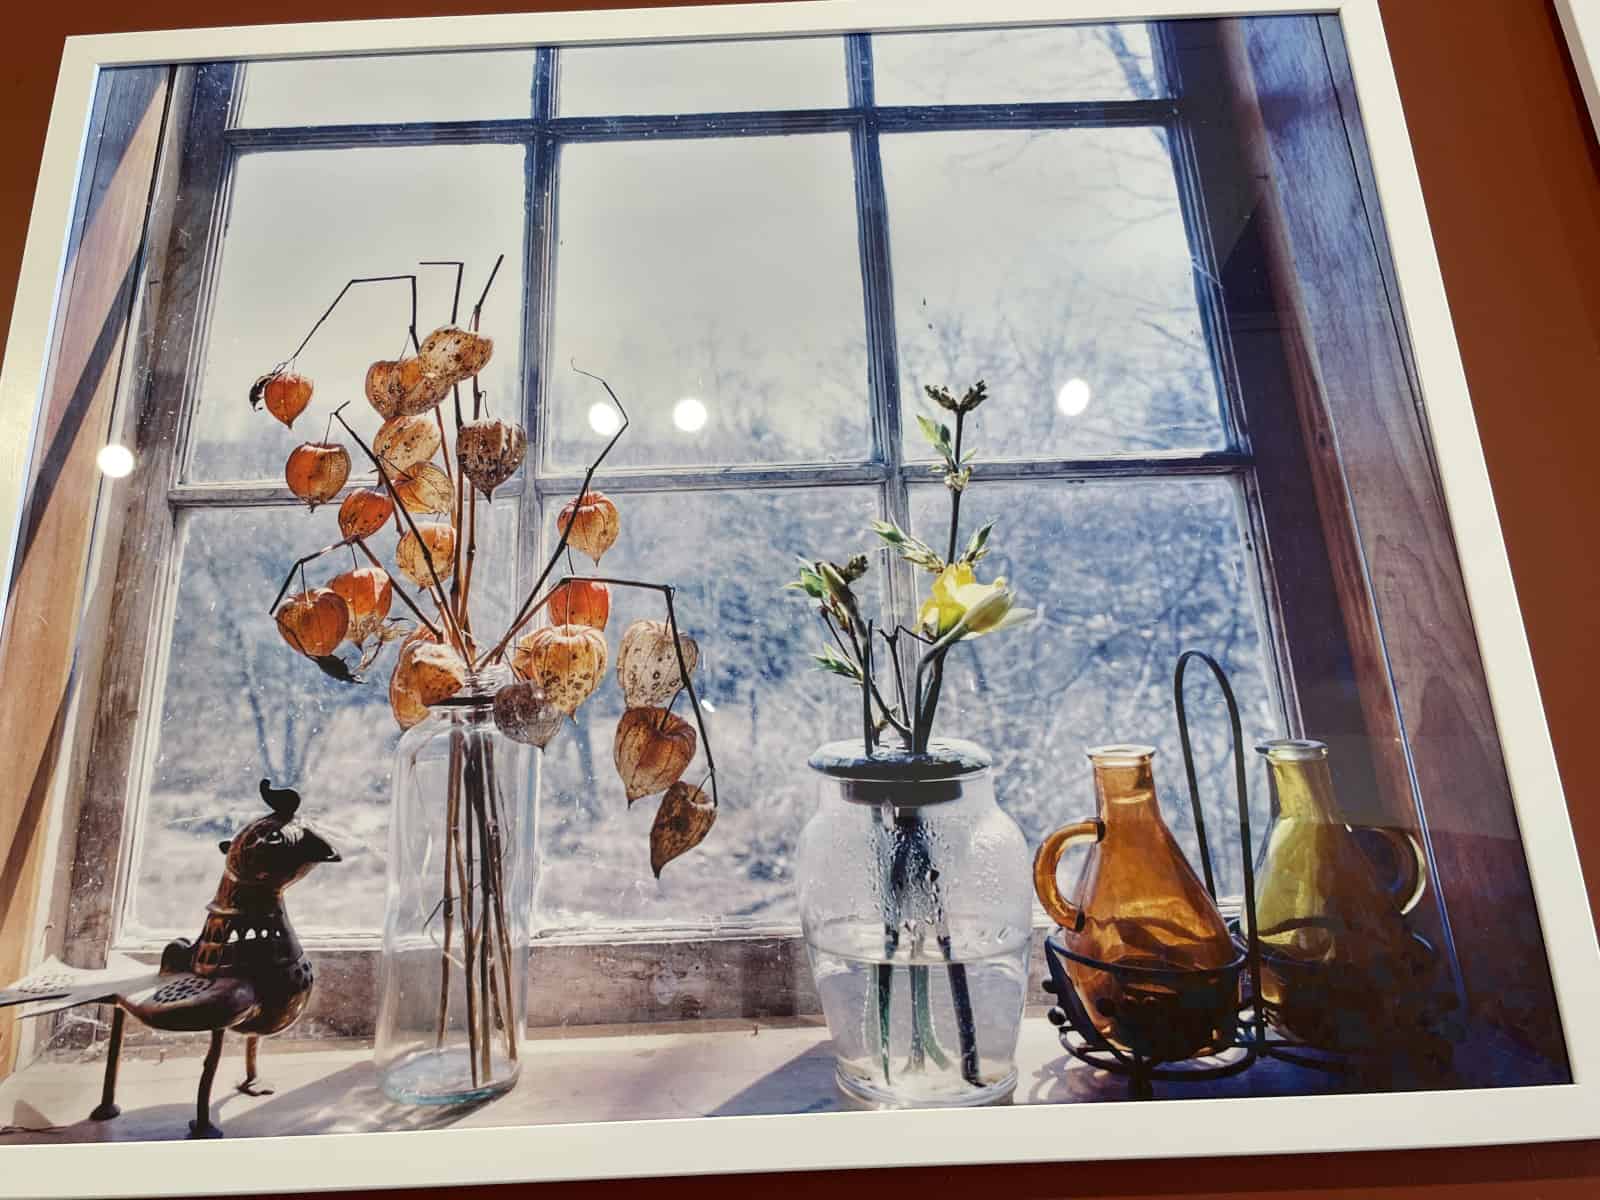 Seed pods catch the loght on a windowsill n Lorena Molina's photographs in 'Unfortunately It Was Paradise' at MCLA in North Adams.